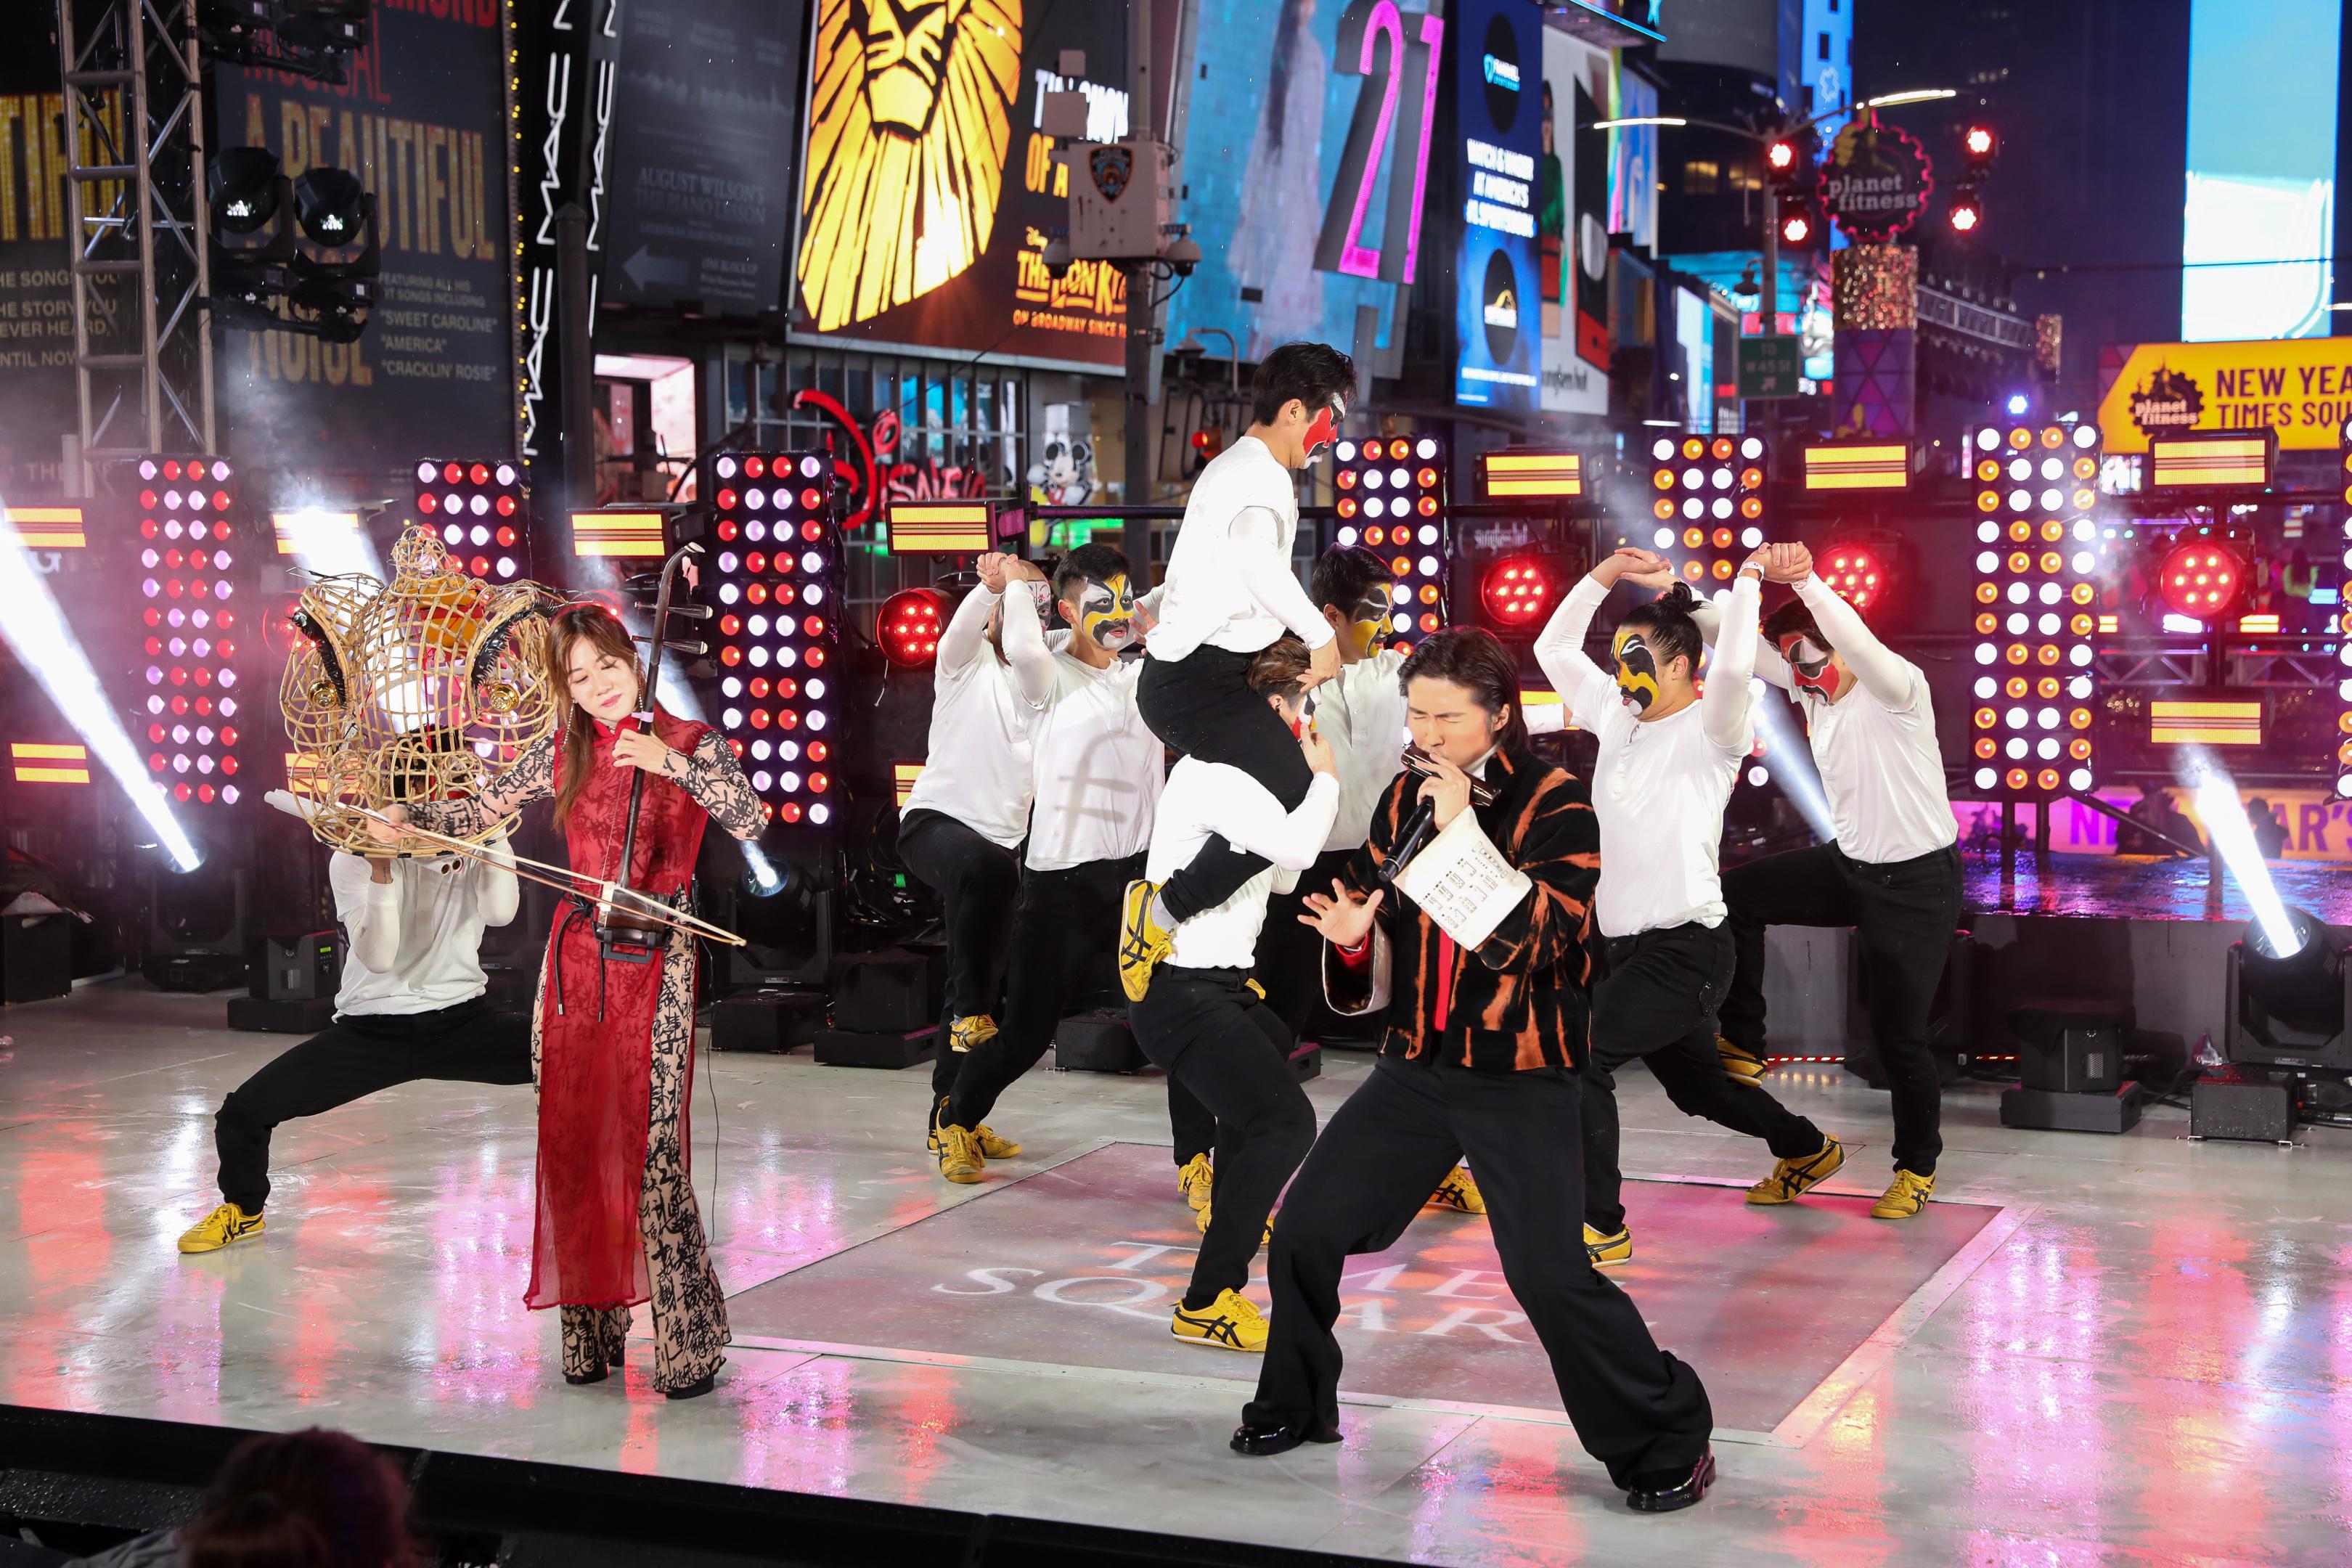 Hong Kong artists enthralled a worldwide audience by kicking off the New York Times Square countdown celebration with a "Kung Fu Contemporary Circus" on December 31, 2022 (New York time).